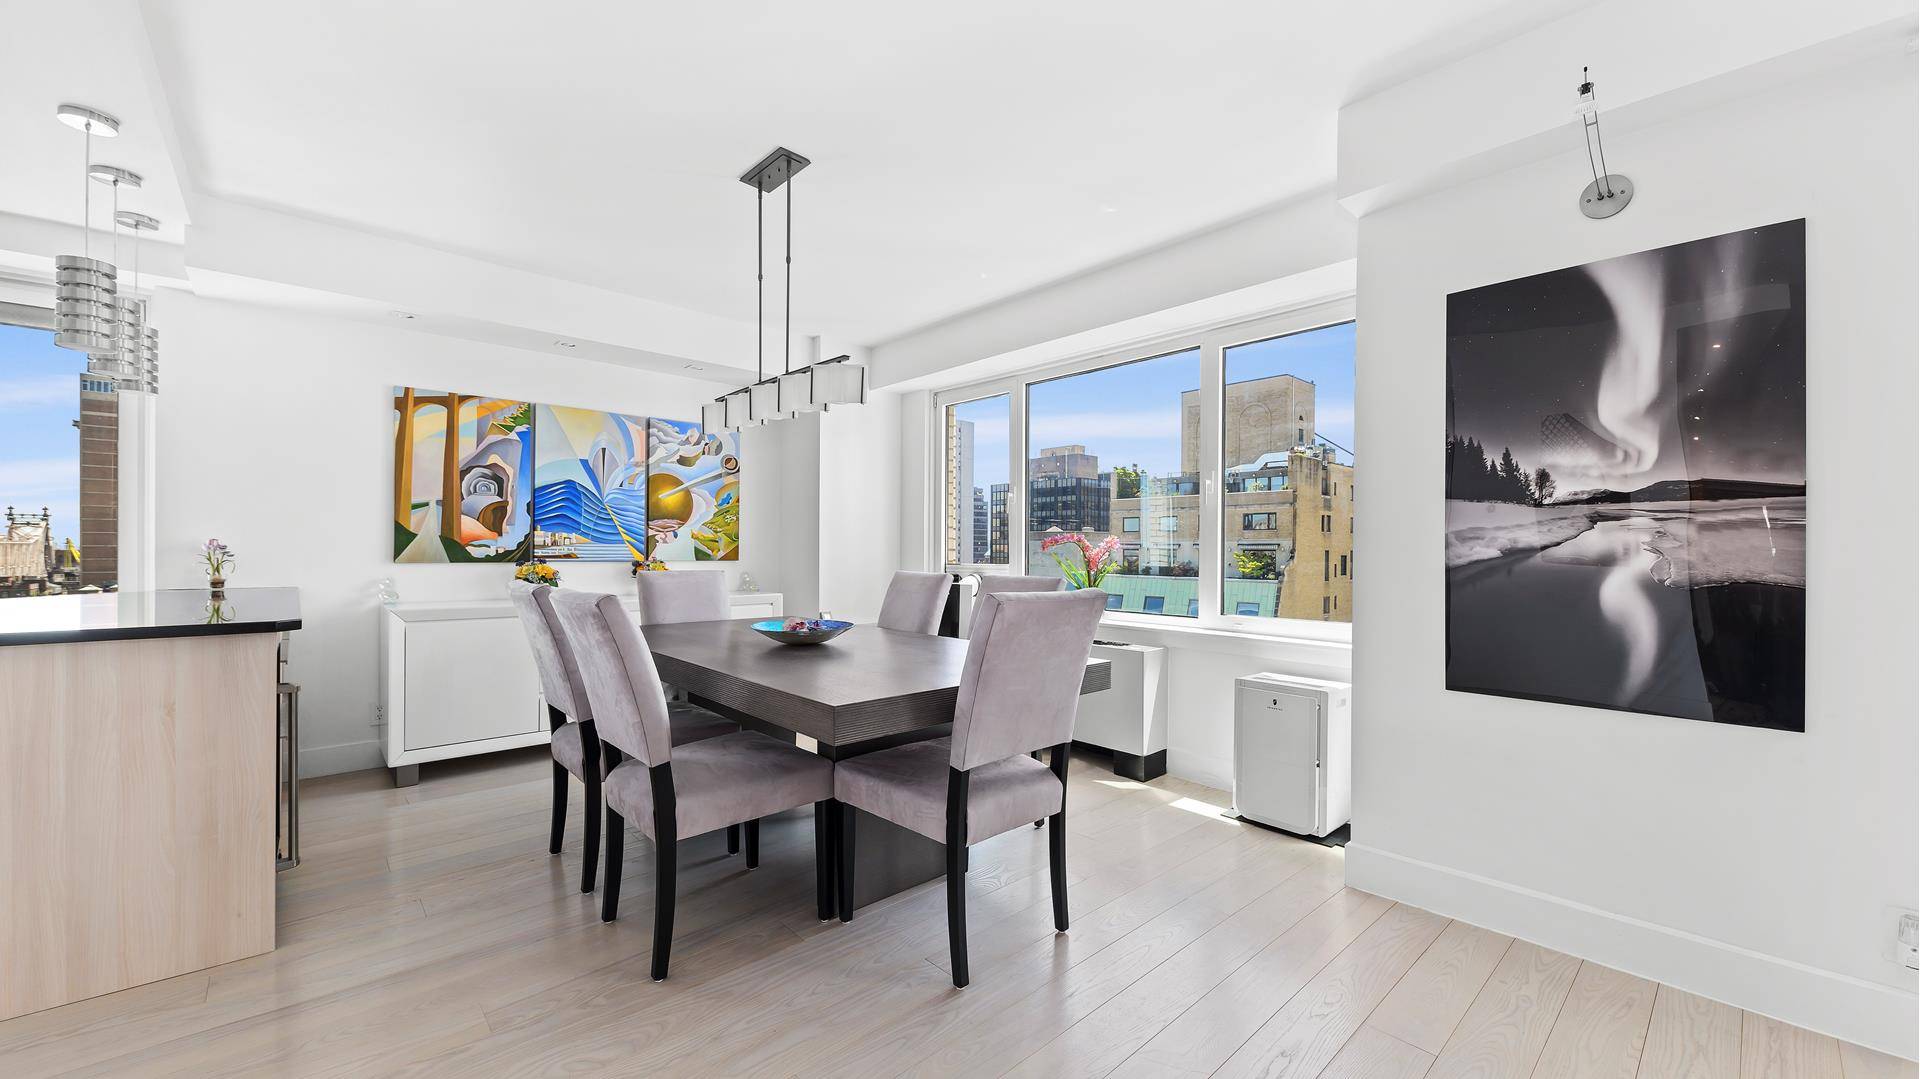 The pinnacle of light, luxury amp ; views await high above the city in this stunning, completely renovated highly sought out L line apartment.